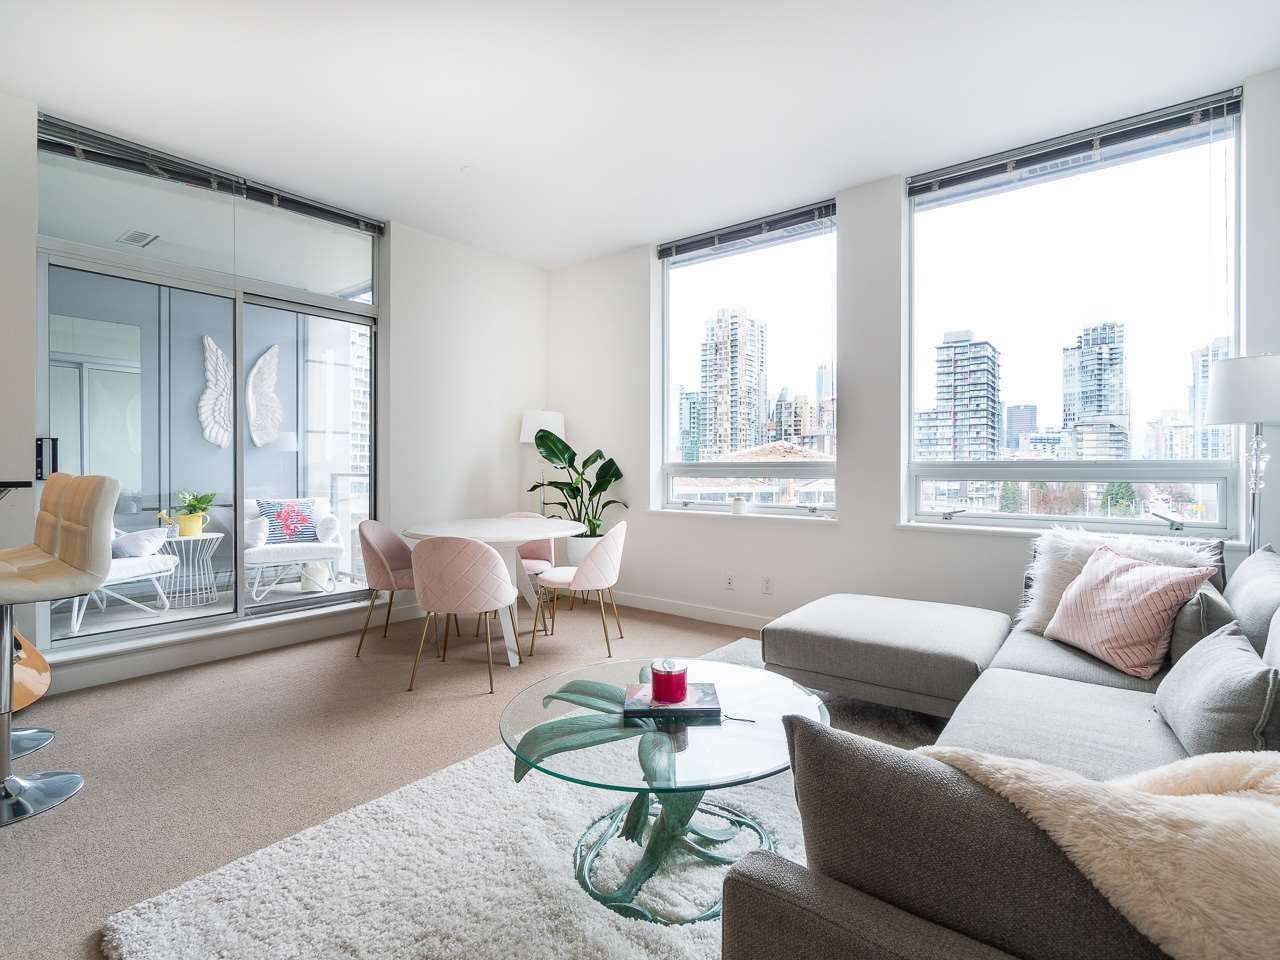 Main Photo: 1106 638 BEACH CRESCENT in Vancouver: Yaletown Condo for sale (Vancouver West)  : MLS®# R2499986